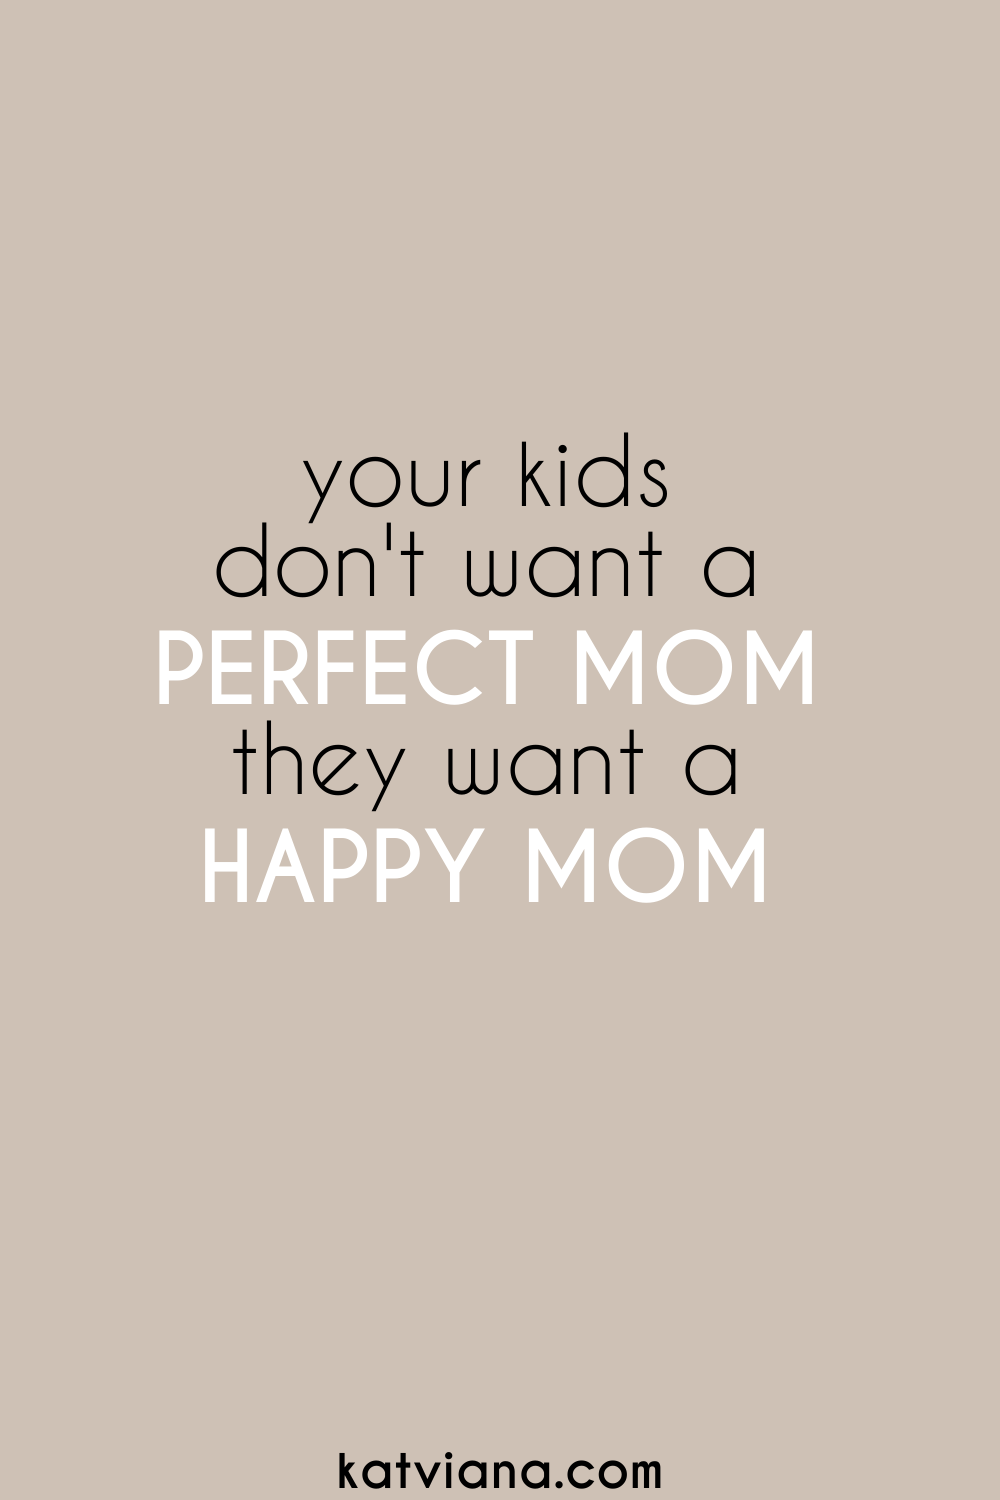 Your kids don't want a perfect mom, they want a happy mom | Kat Viana